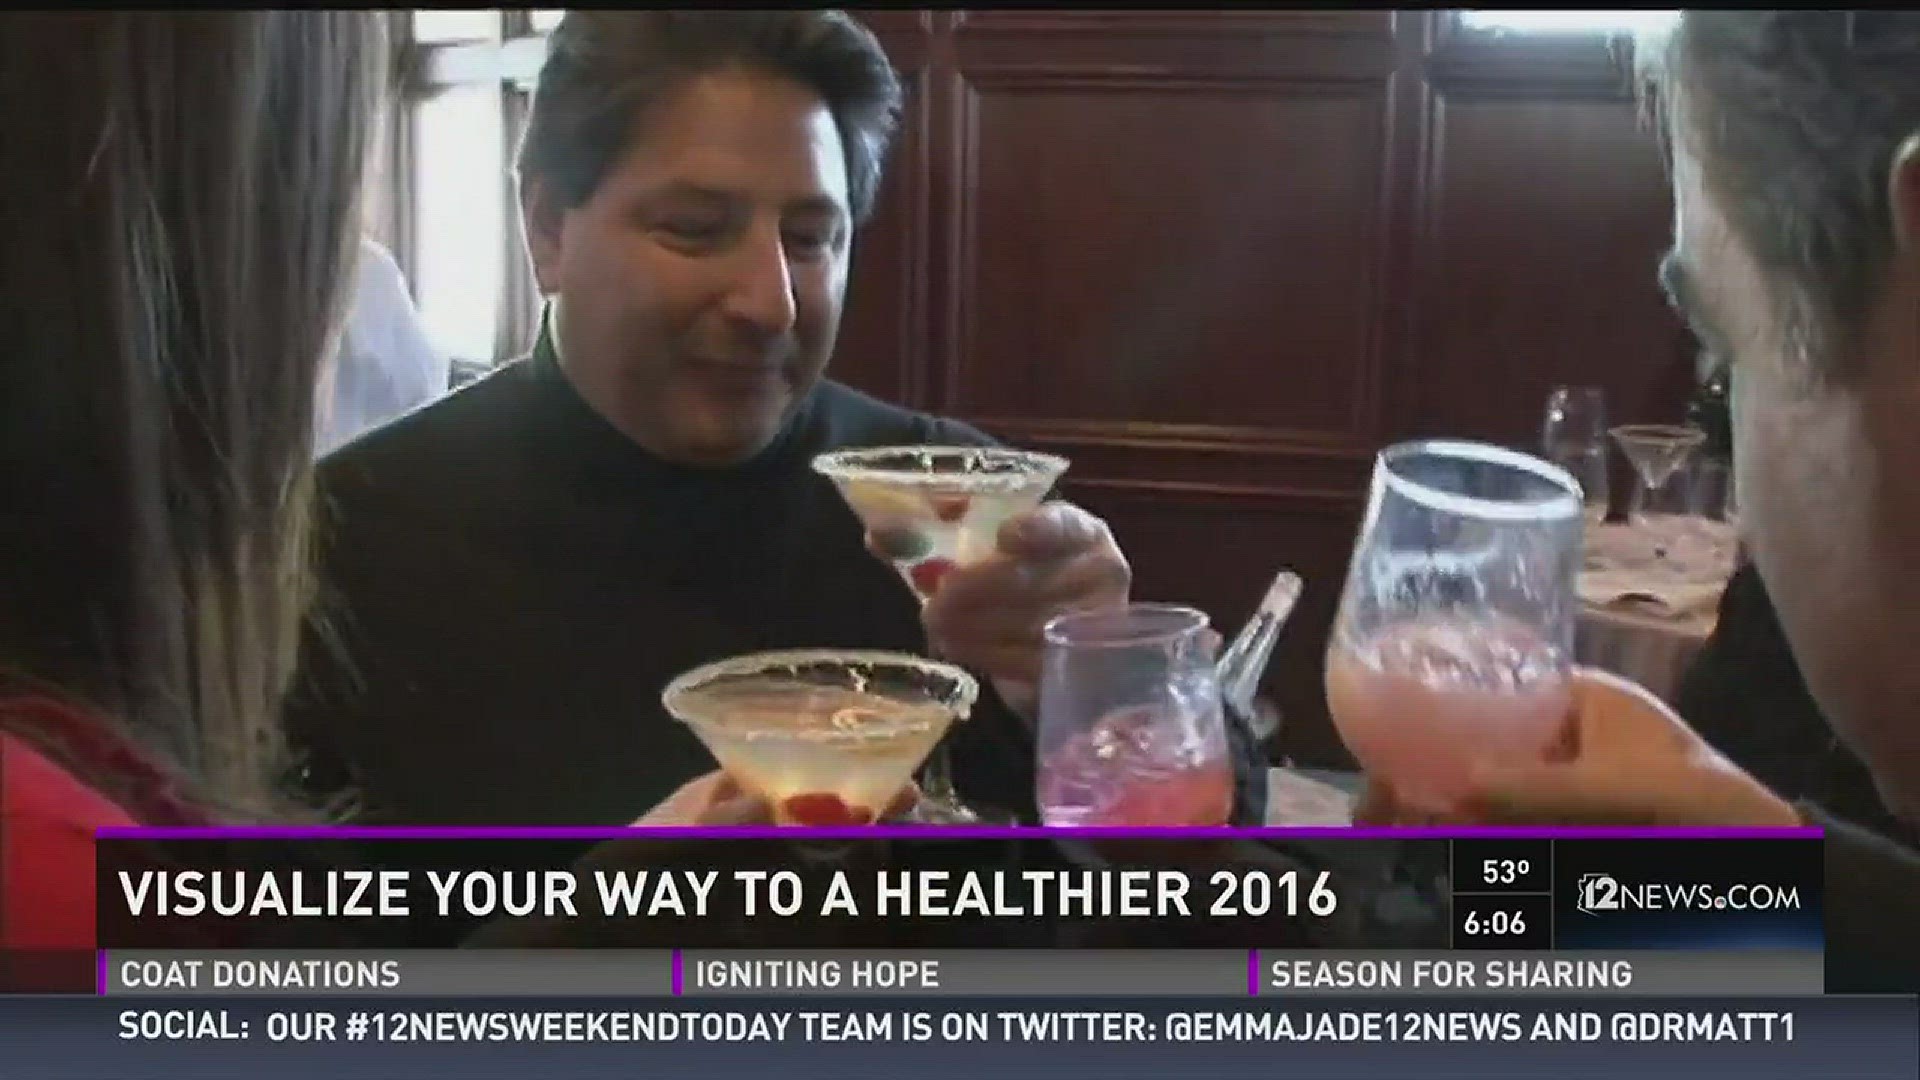 Nutritionist offers tips and tricks to stay healthy during the holidays.